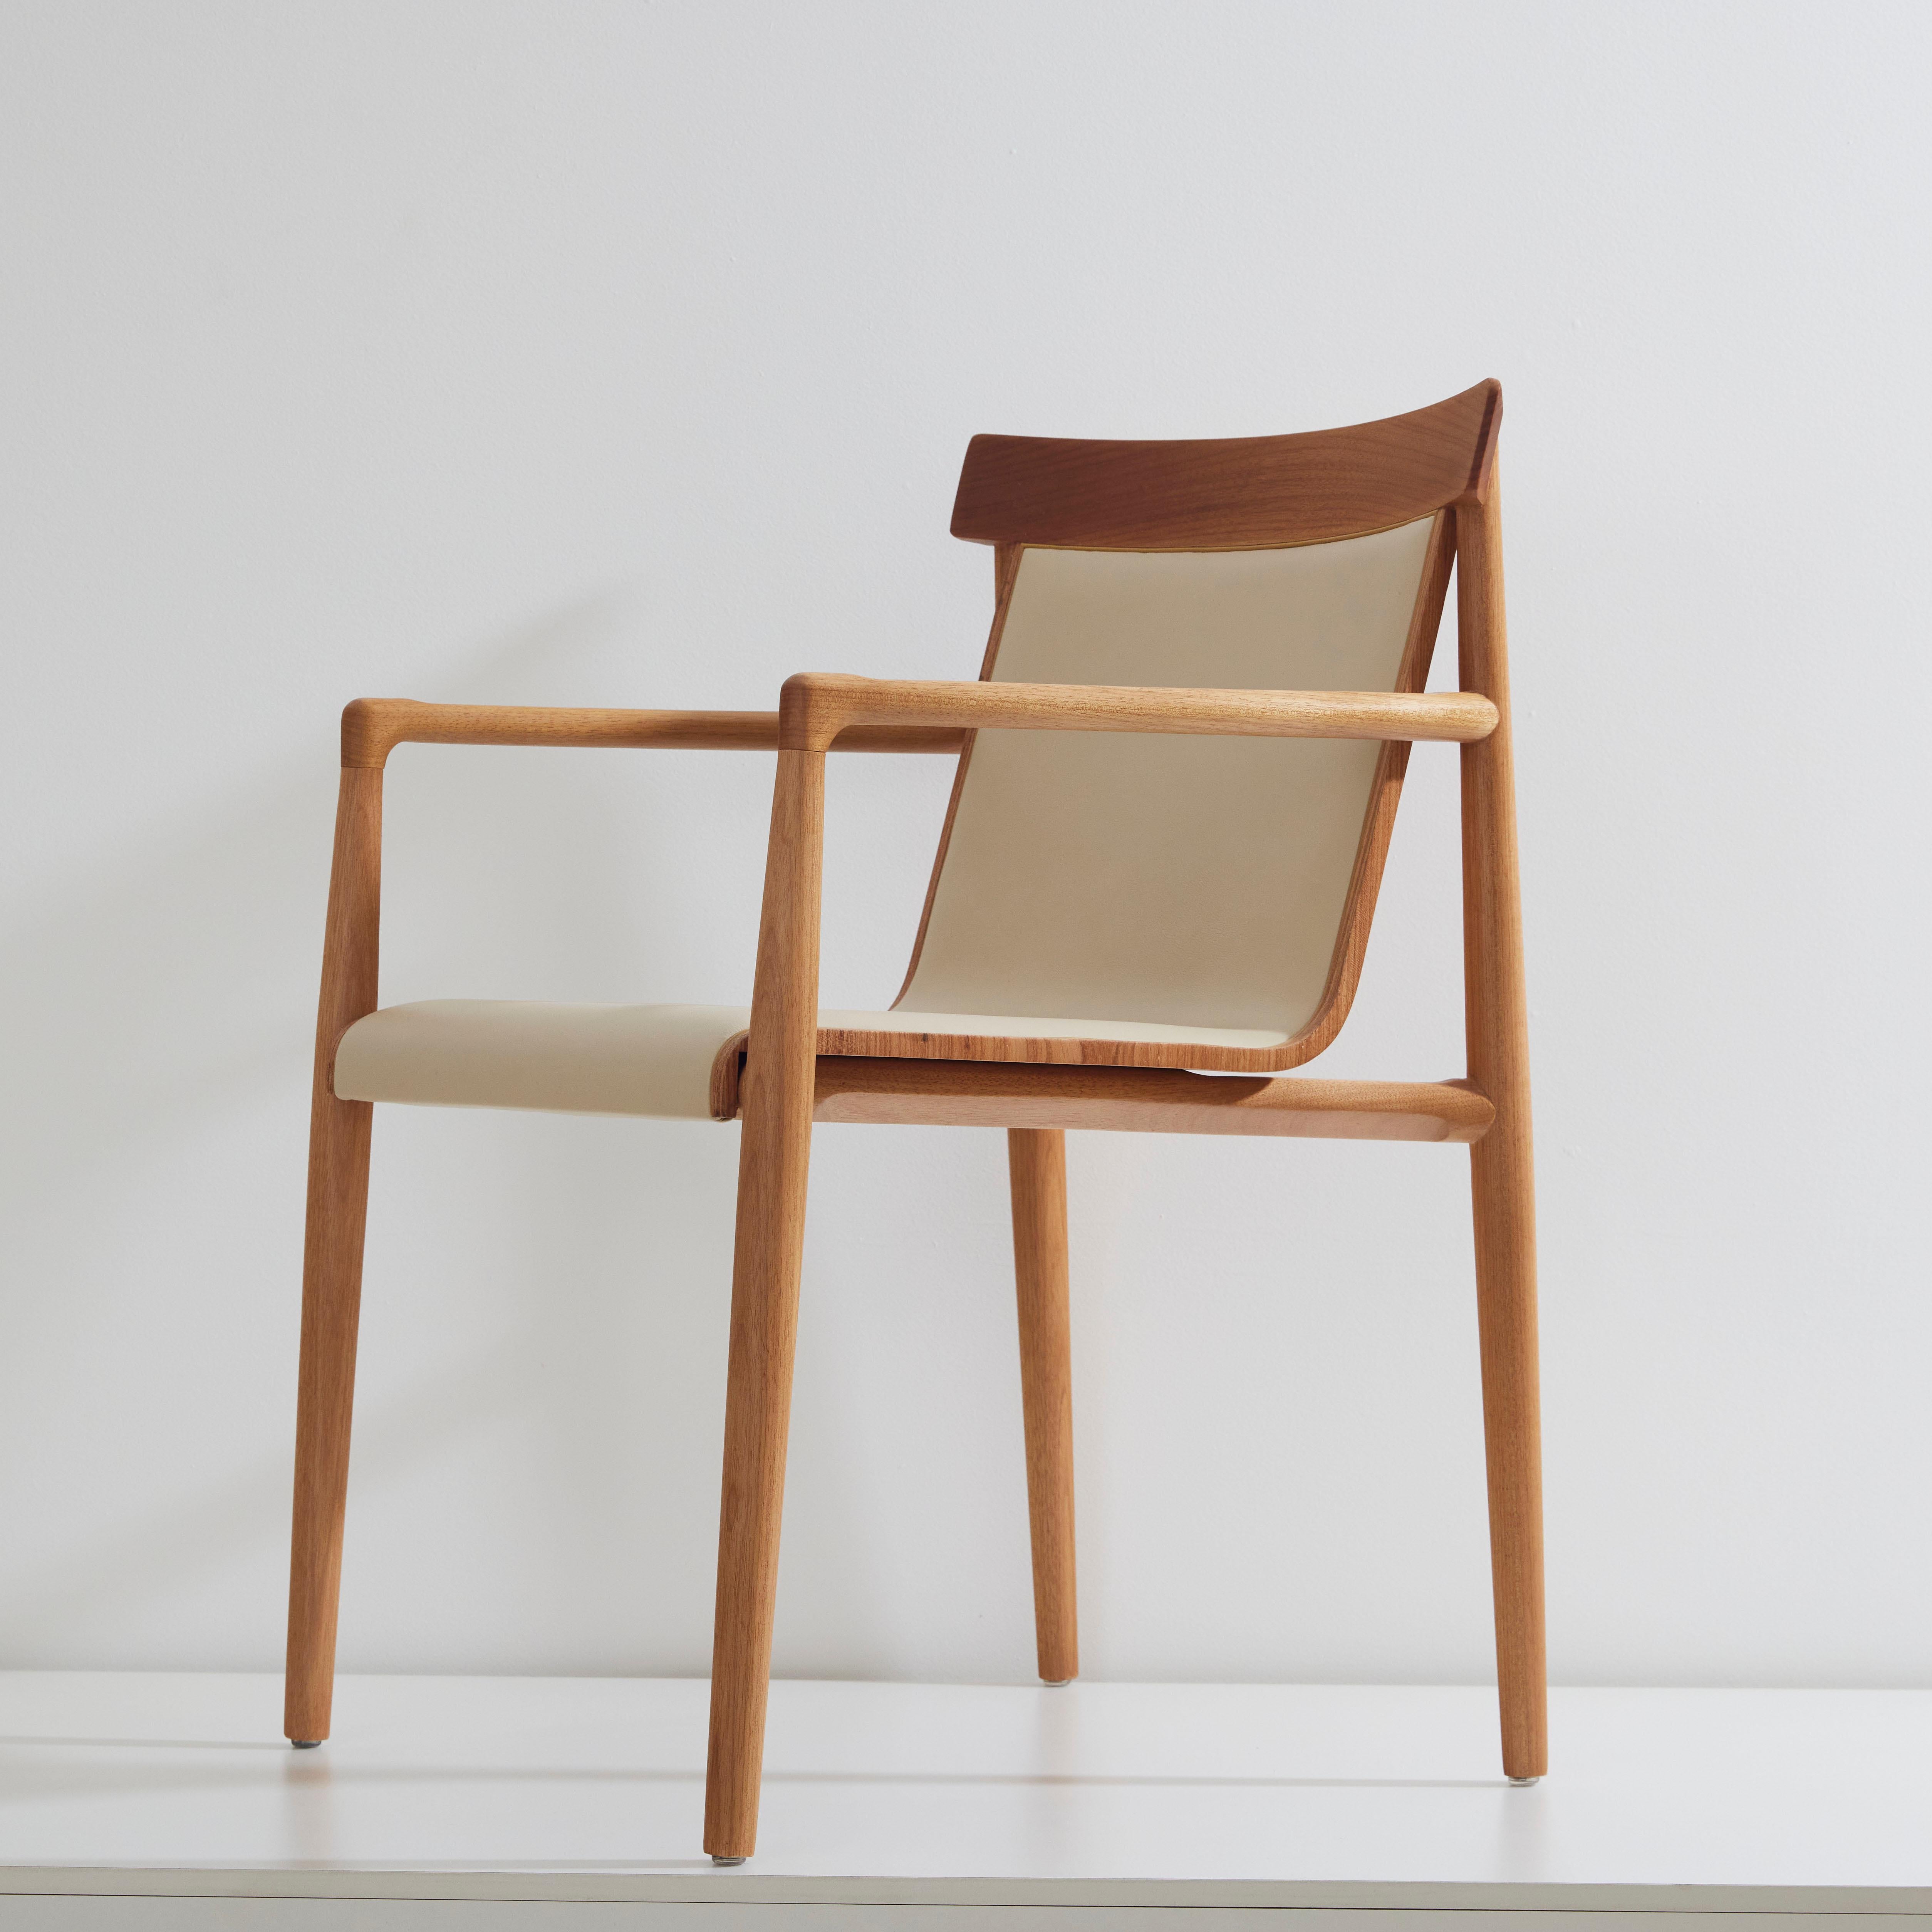 Brazilian Contemporary Chair in Solid Wood, Upholstered in Leather or Textiles with Arms For Sale